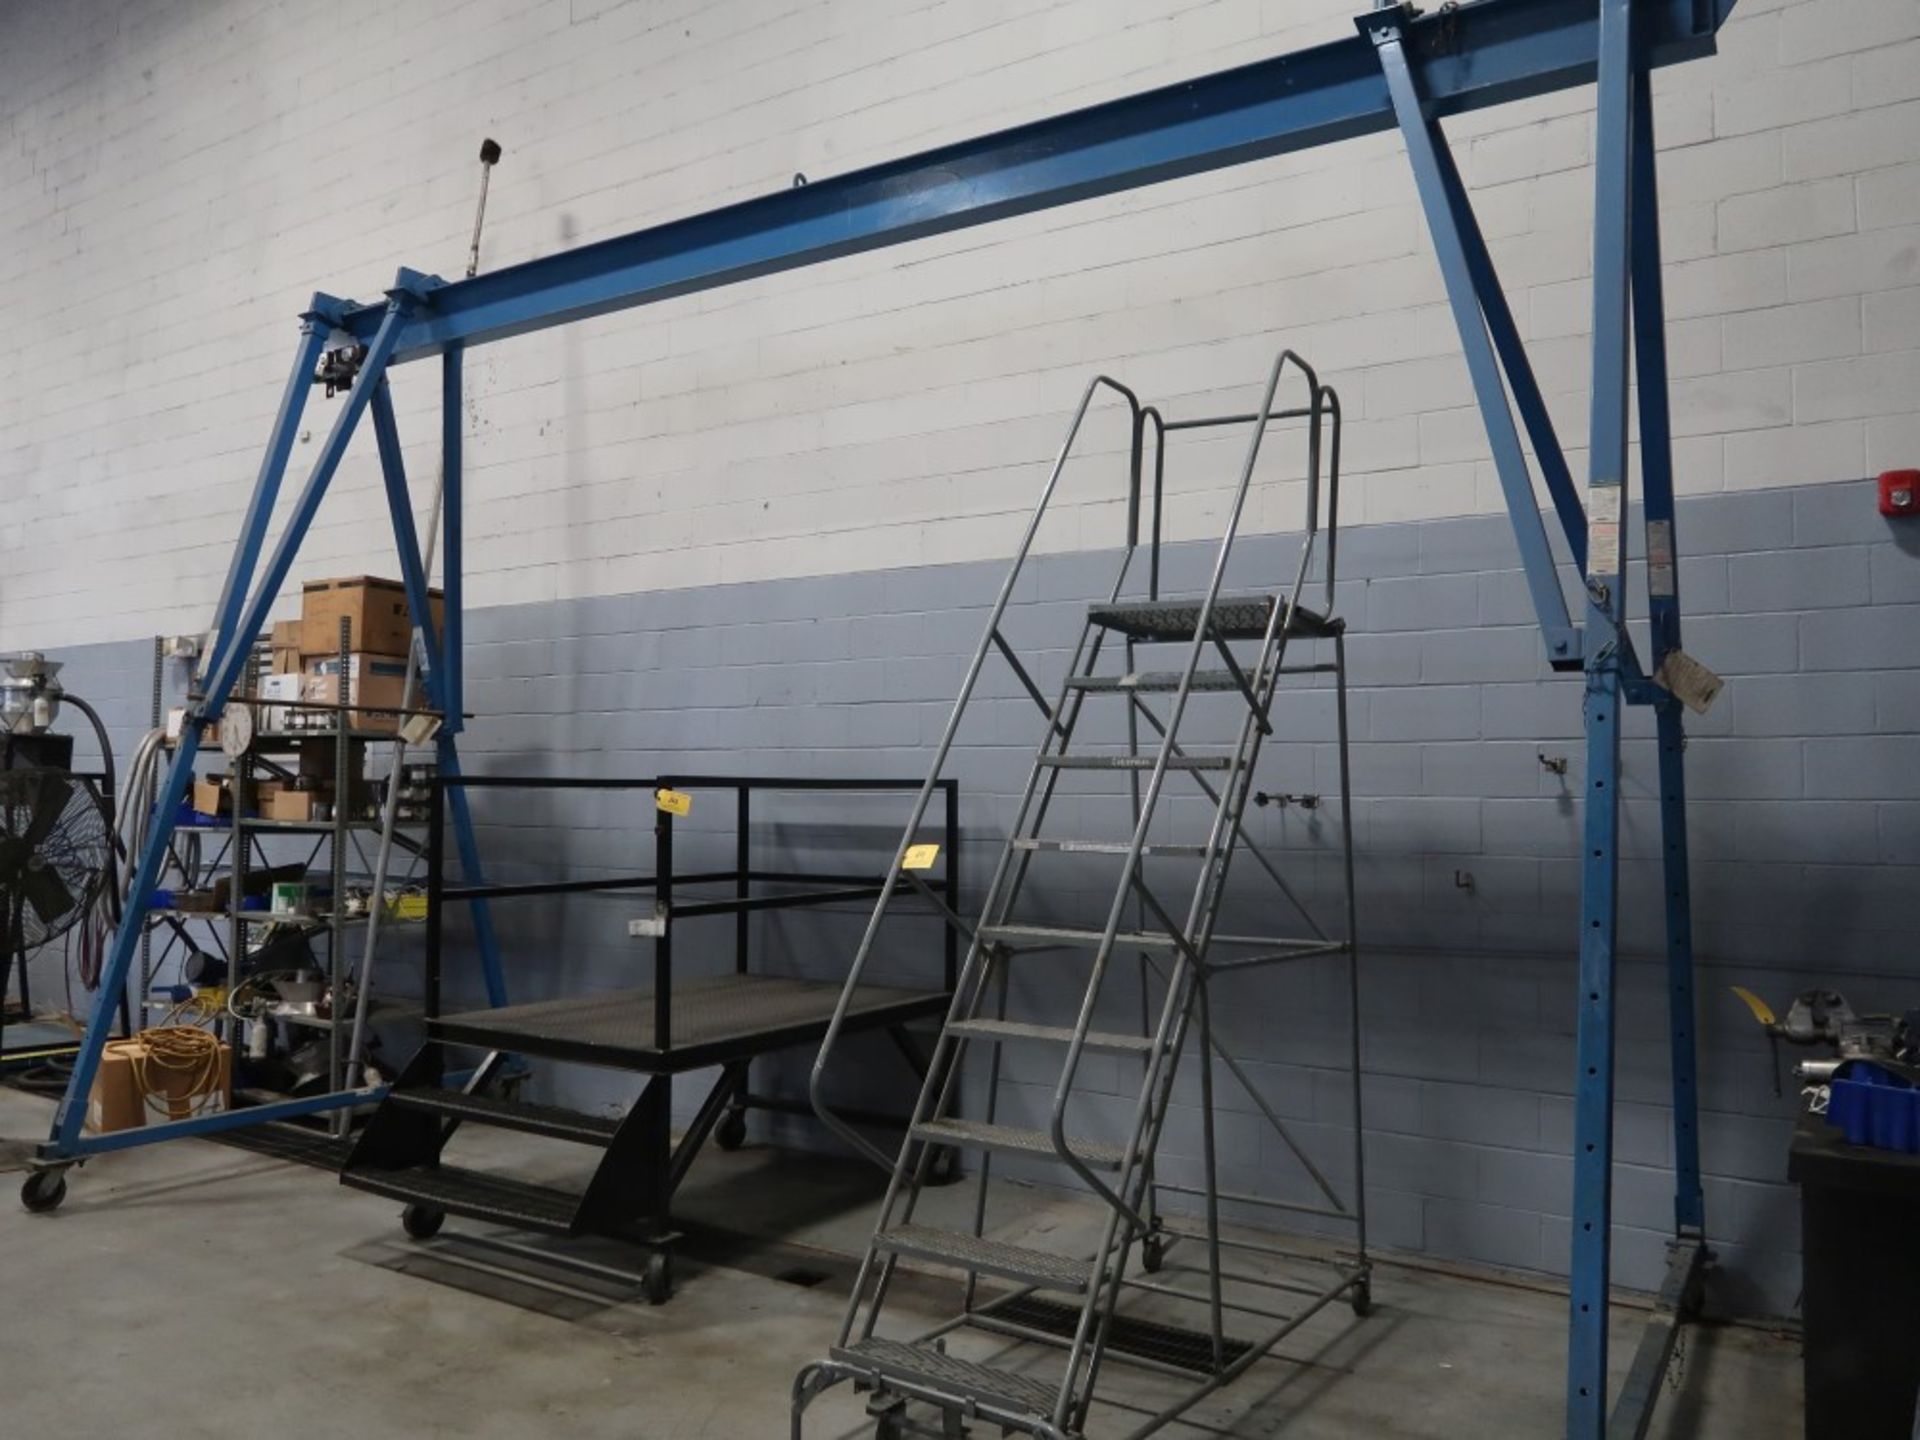 Spanco Portable Gantry Approx 20' Adjustable Height and Width - Image 2 of 3